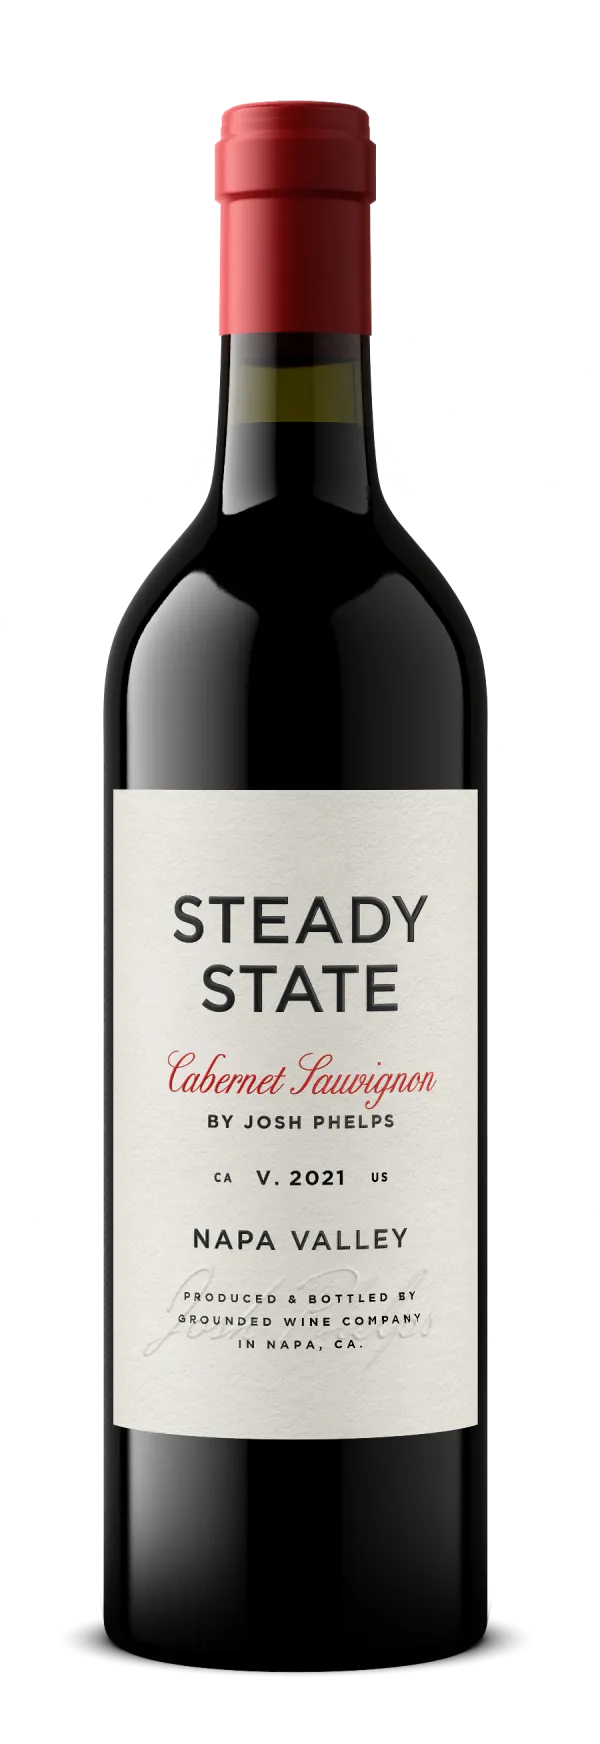 Bottle of Grounded Wine Co Steady Statewith label visible